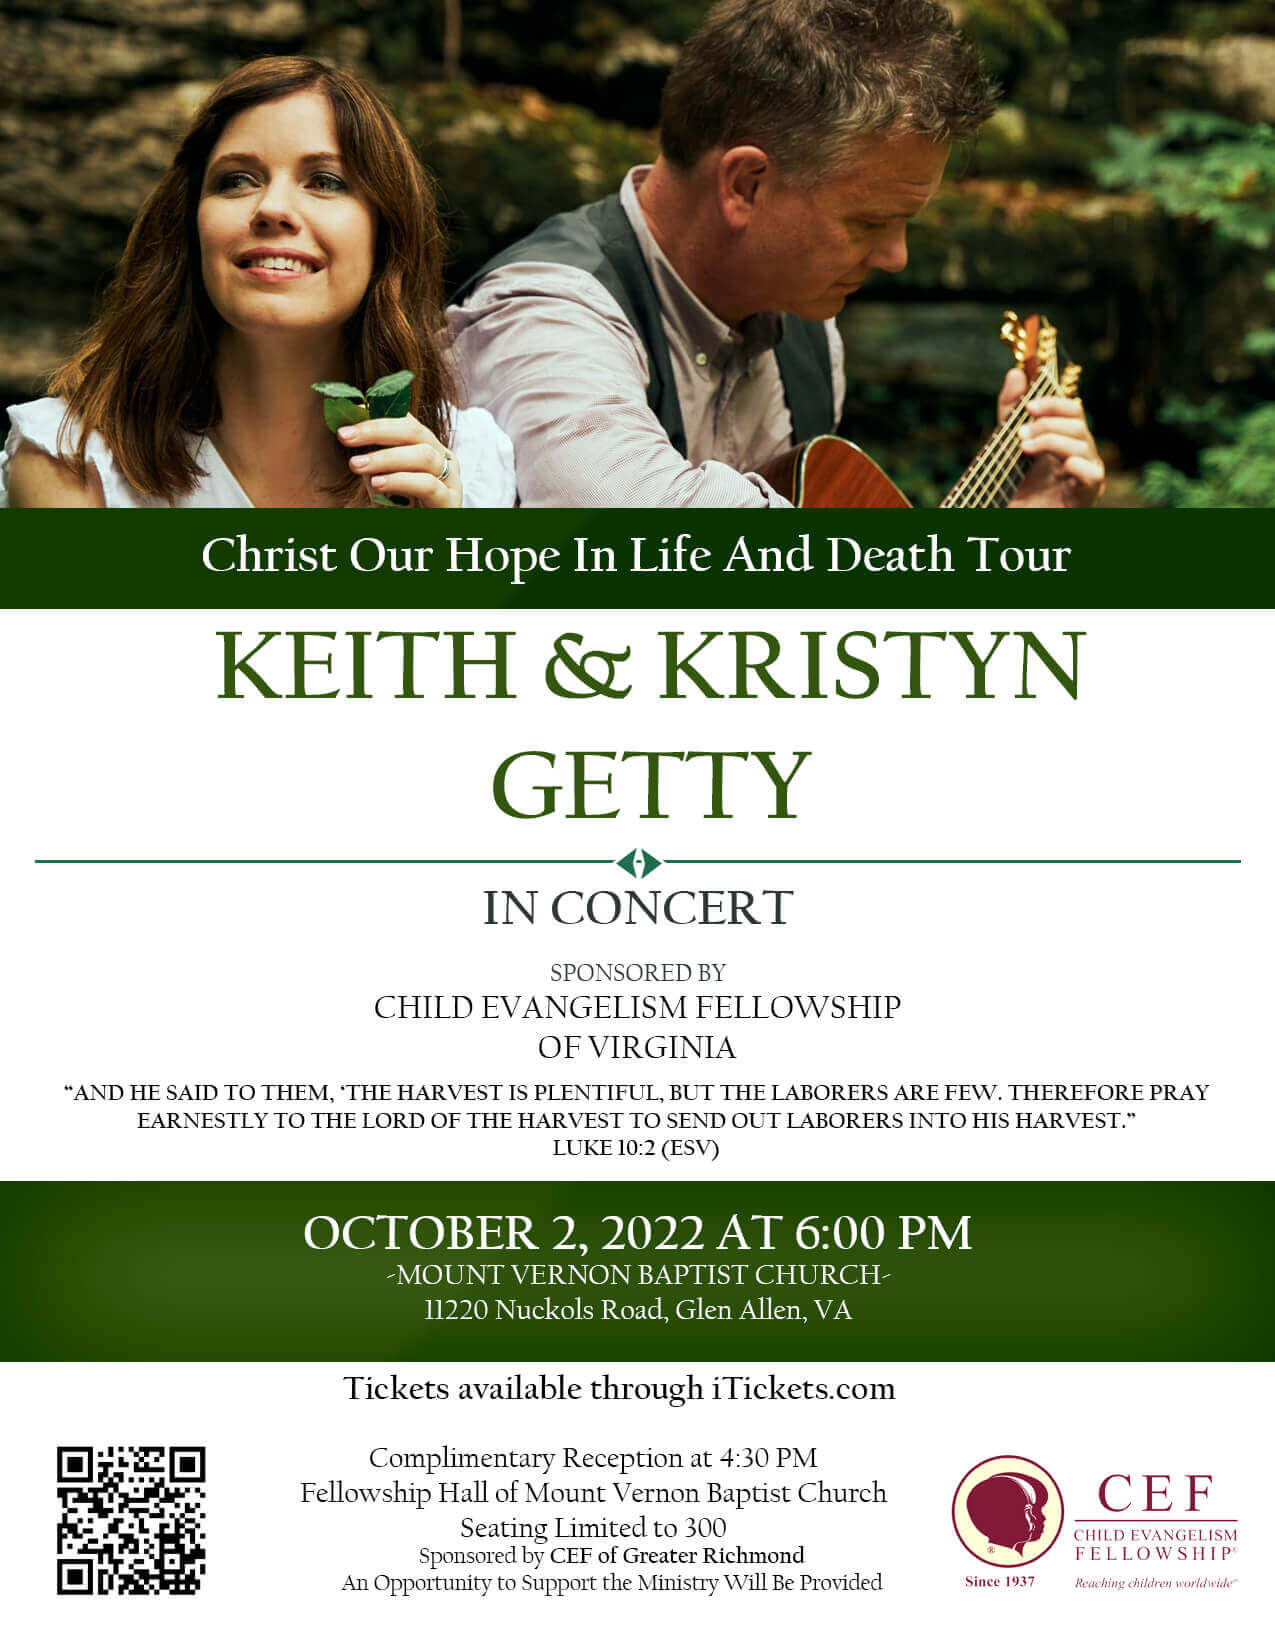 Keith and Kristyn Getty “Christ Our Hope in Life & Death Tour” Sunday, October 2nd Mt Vernon Baptist Church